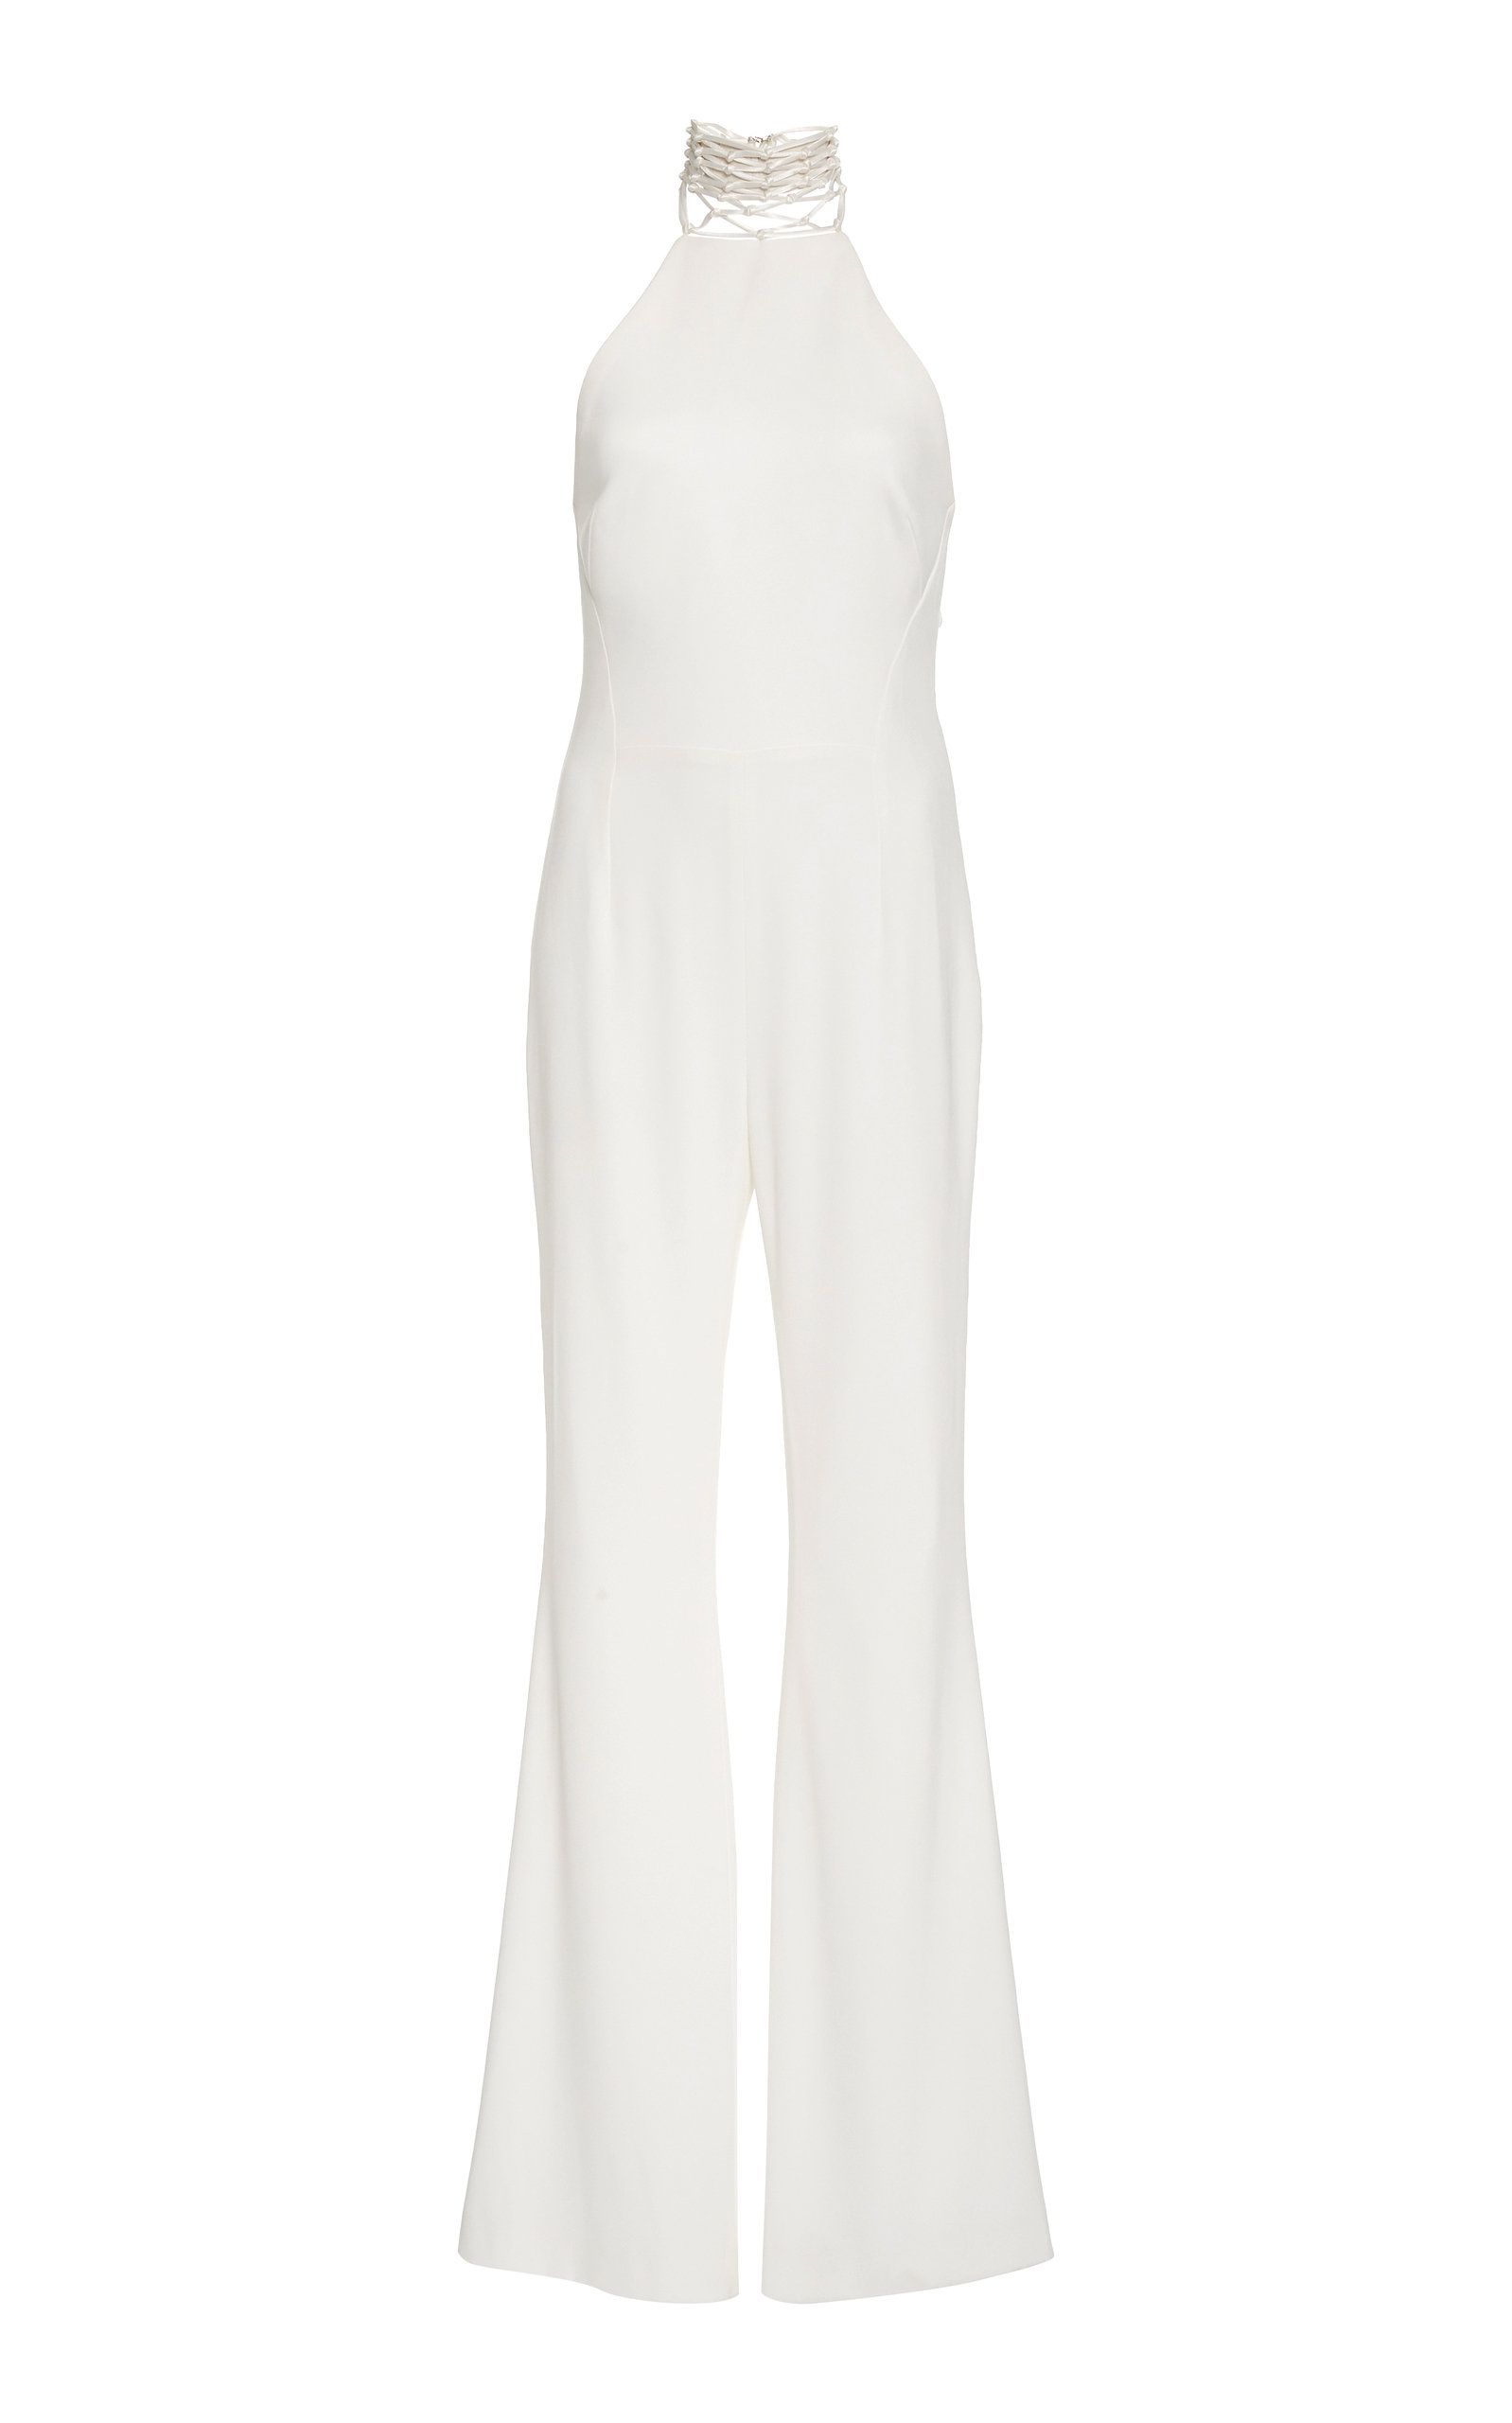 white romper wedding outfit